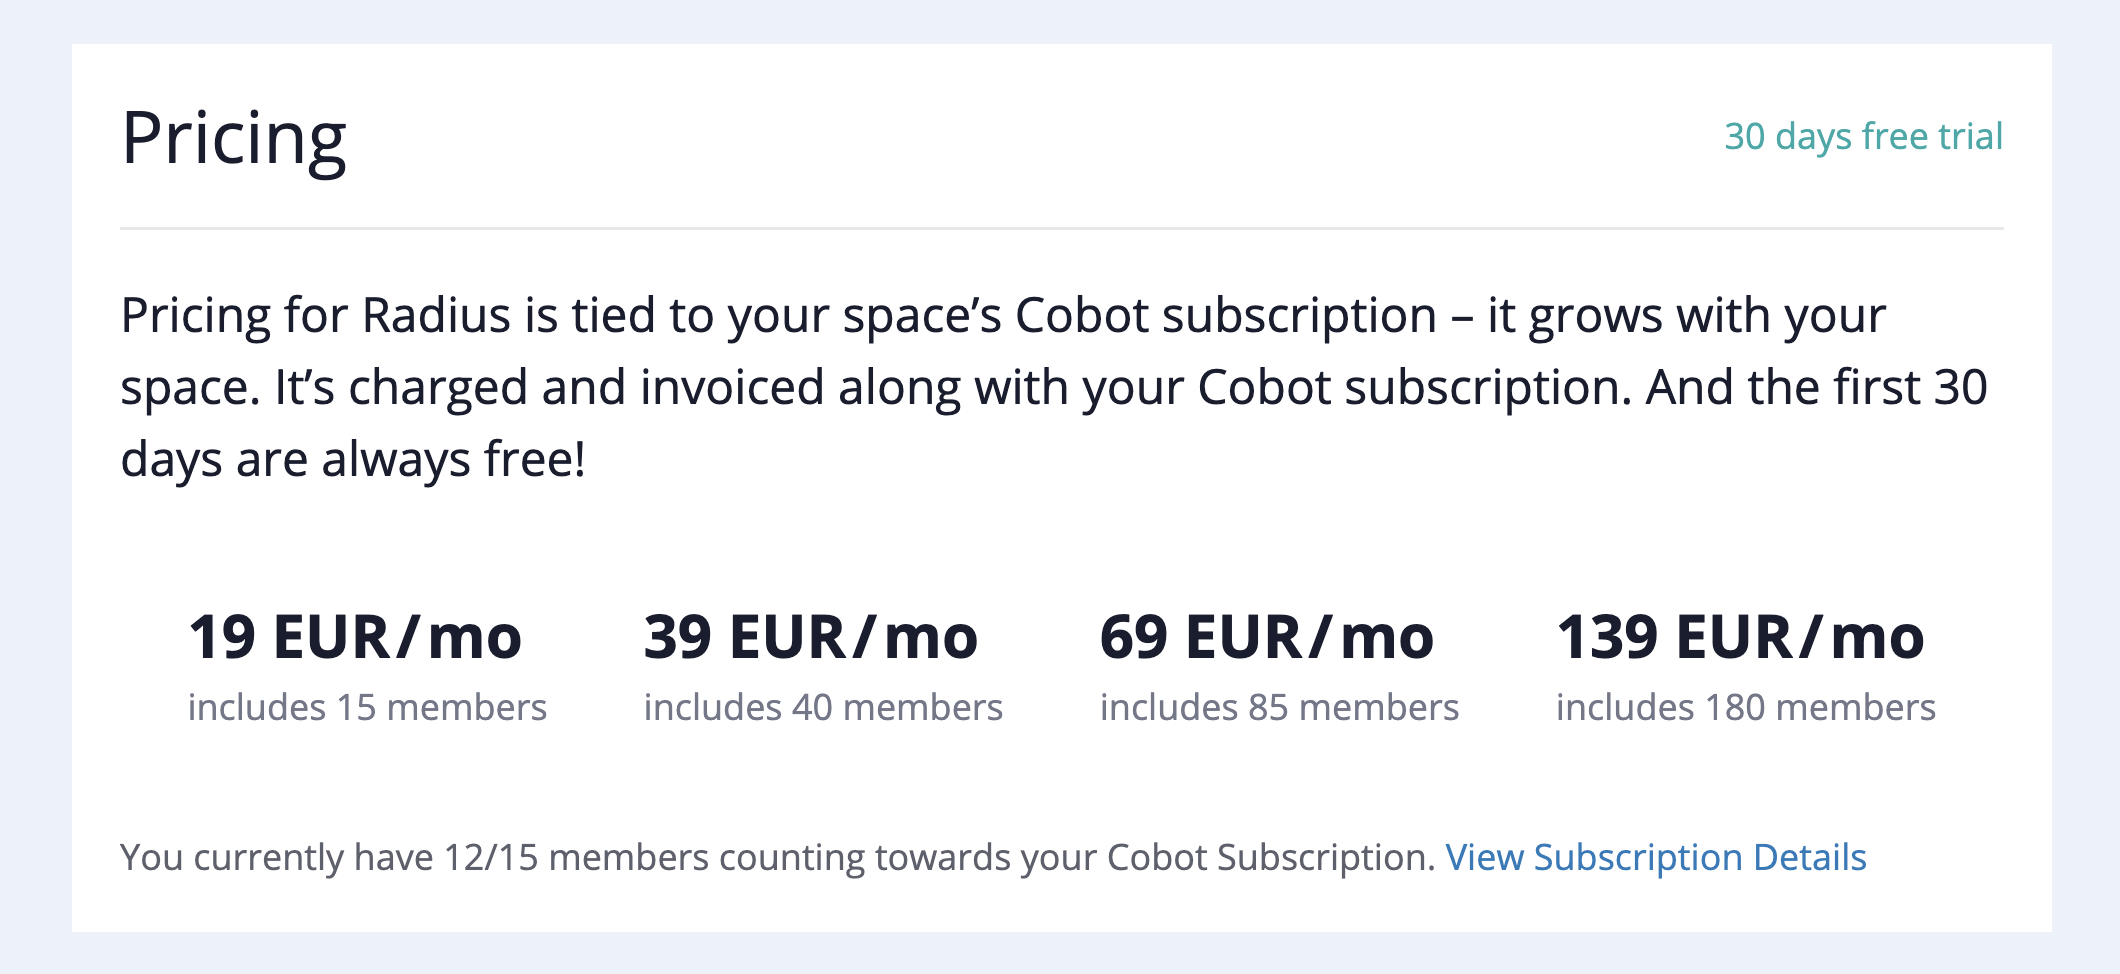 ALT: When your subscription is for 15 members pay 19 USD per month for Radius; for 40 members pay 39 USD per month; for 85 members pay 69 USD per month, for 180 members pay 129 USD per month.